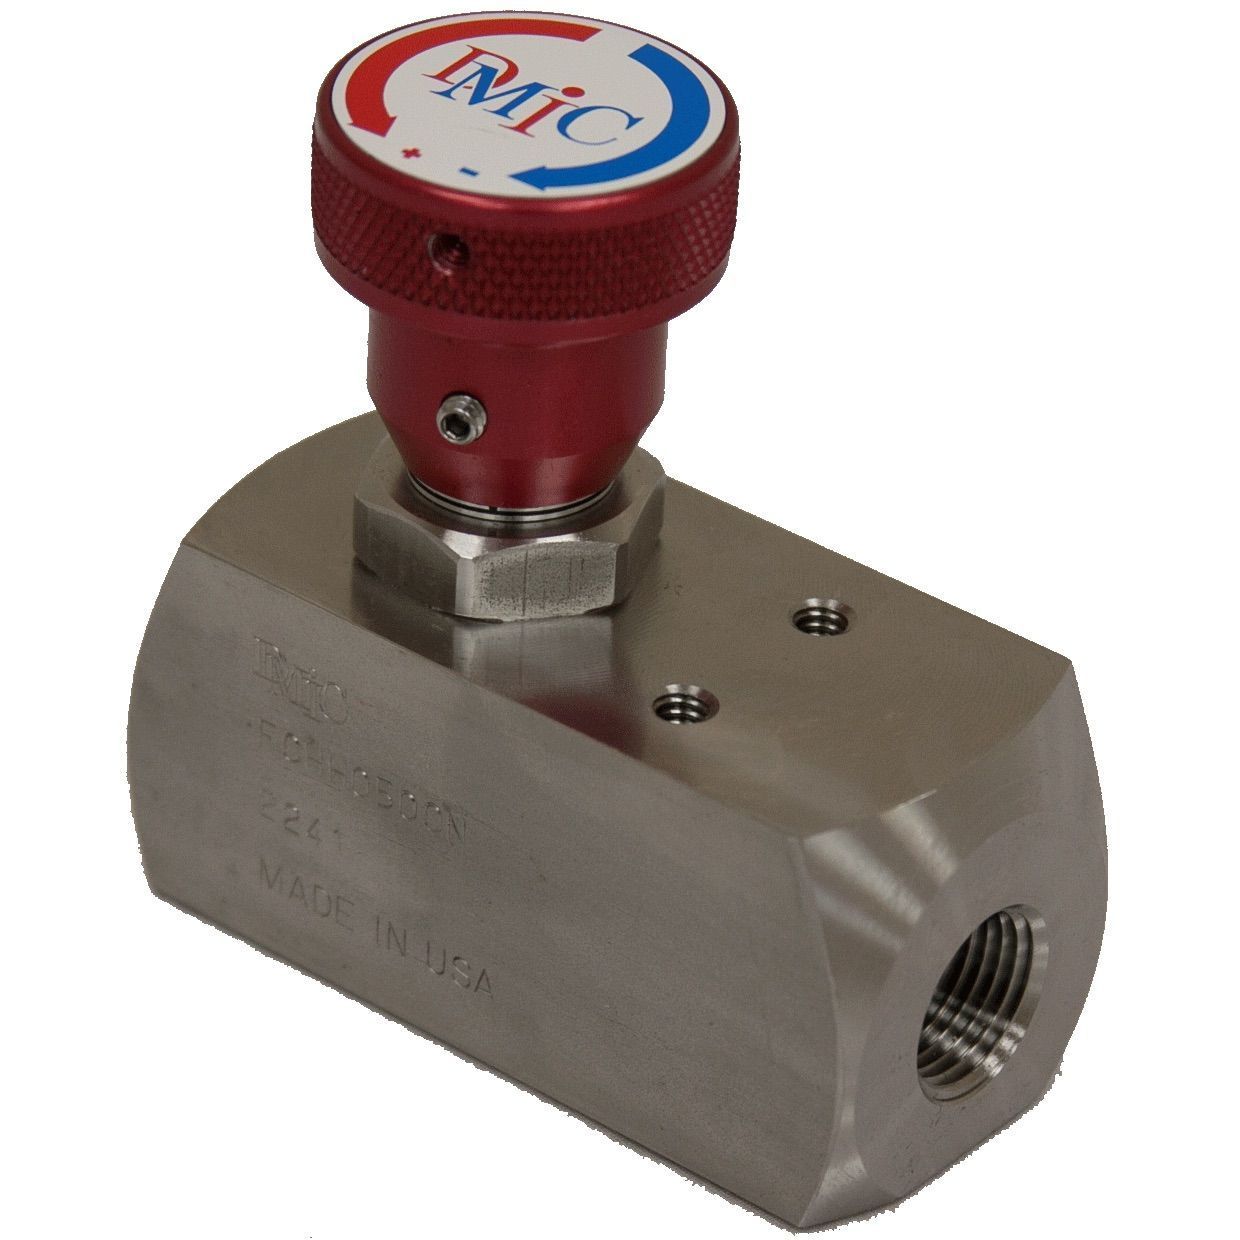 FCHH-2000S-2221 : DMIC Flow Control, Unidirectional, with Integrated Check, #32 SAE (2"), 316SS, 10000psi